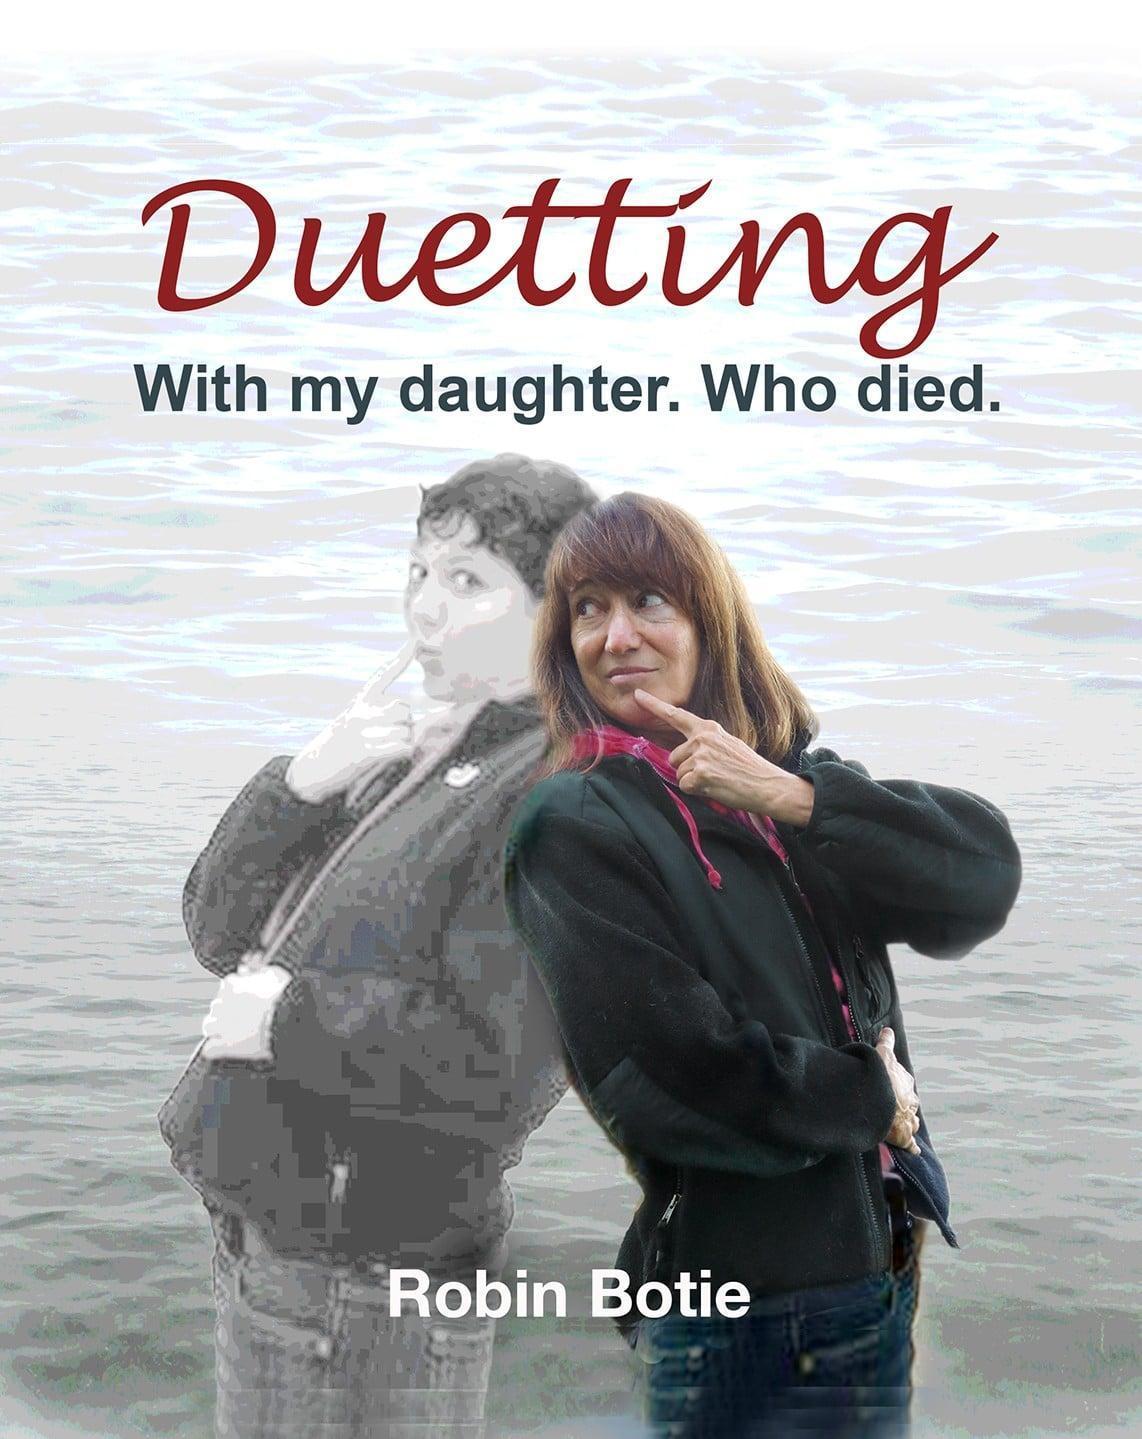 Robin Botie of Ithaca, New York, photoshops a cover for her manuscript that helped her heal from child loss, and will now be shared on her blog.